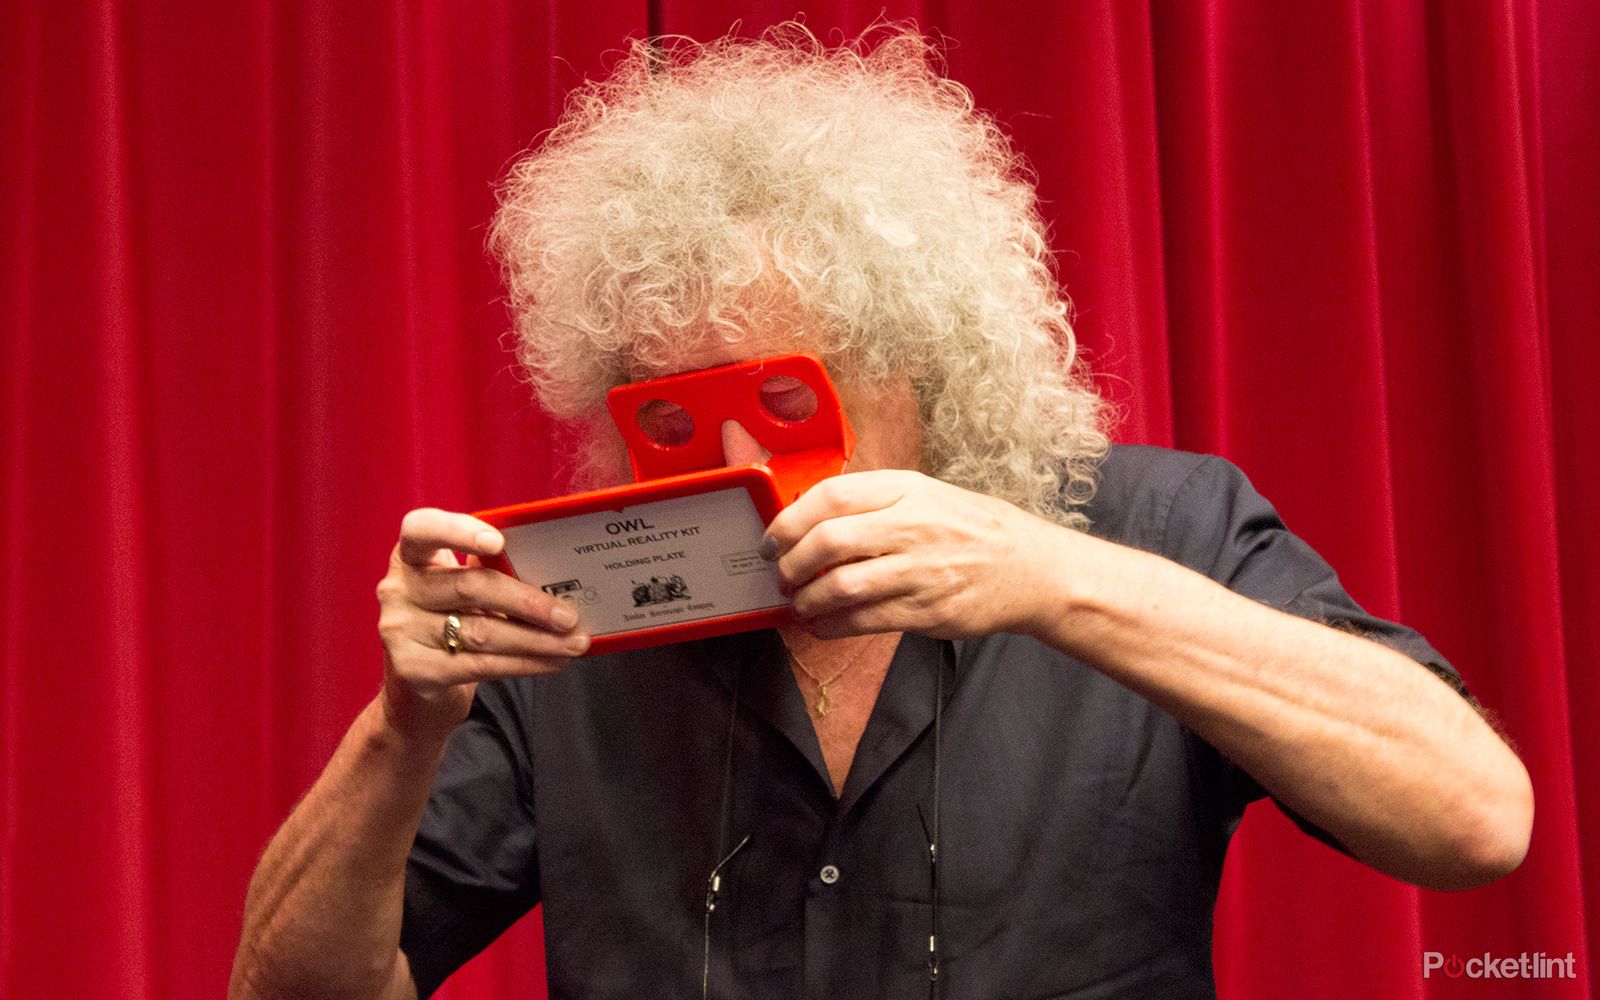 brian may makes any smartphone vr ready with his owl stereoscope image 1